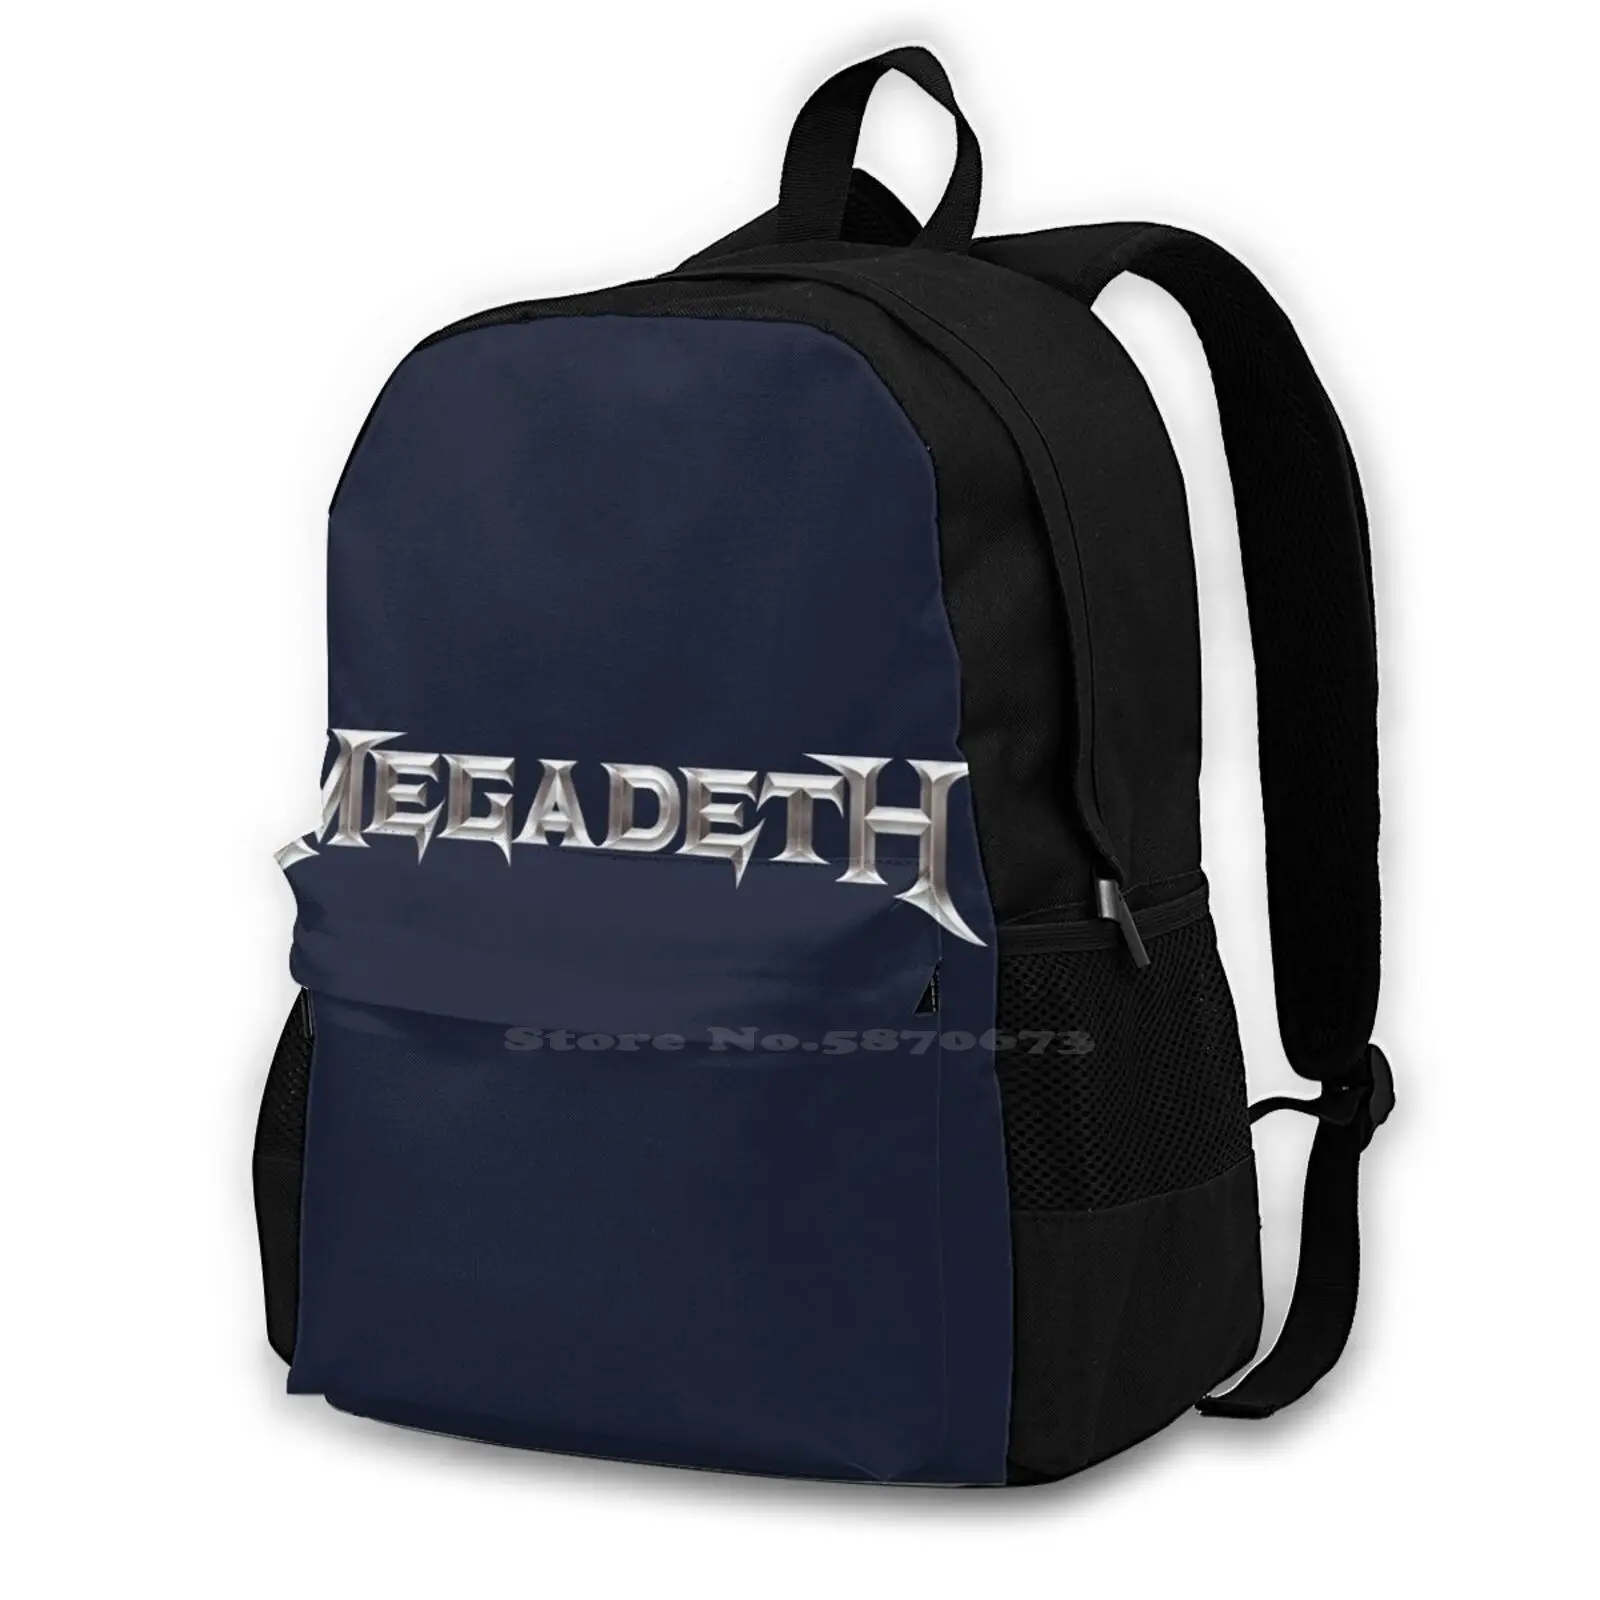 

Dave Mustaine T-Shirt Metal Tee Women'S Backpack For Student School Laptop Travel Bag Dave Mustaine Metal Womens